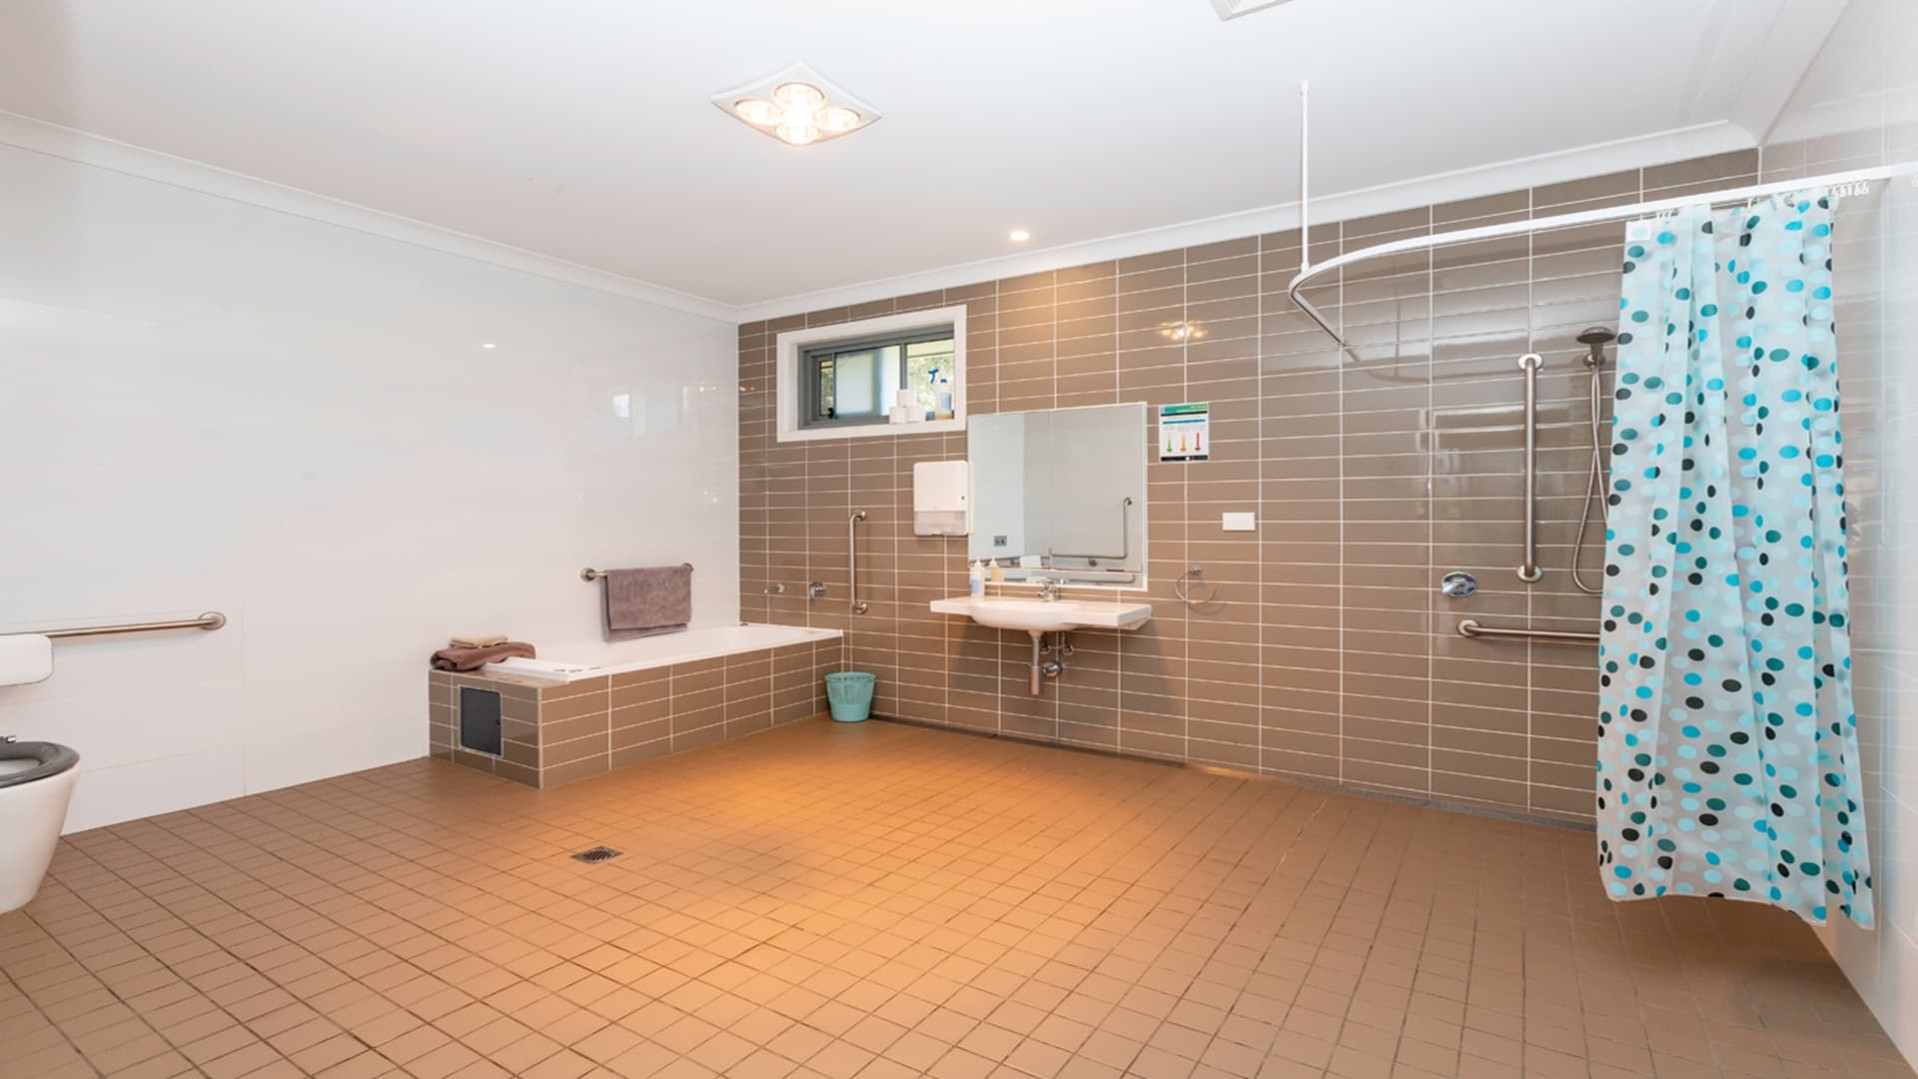 Accessible, spacious bathroom with brown tiles on floor and walls.  Stepless shower and blue shower curtain. small bathtub and basin with wheelchair access.